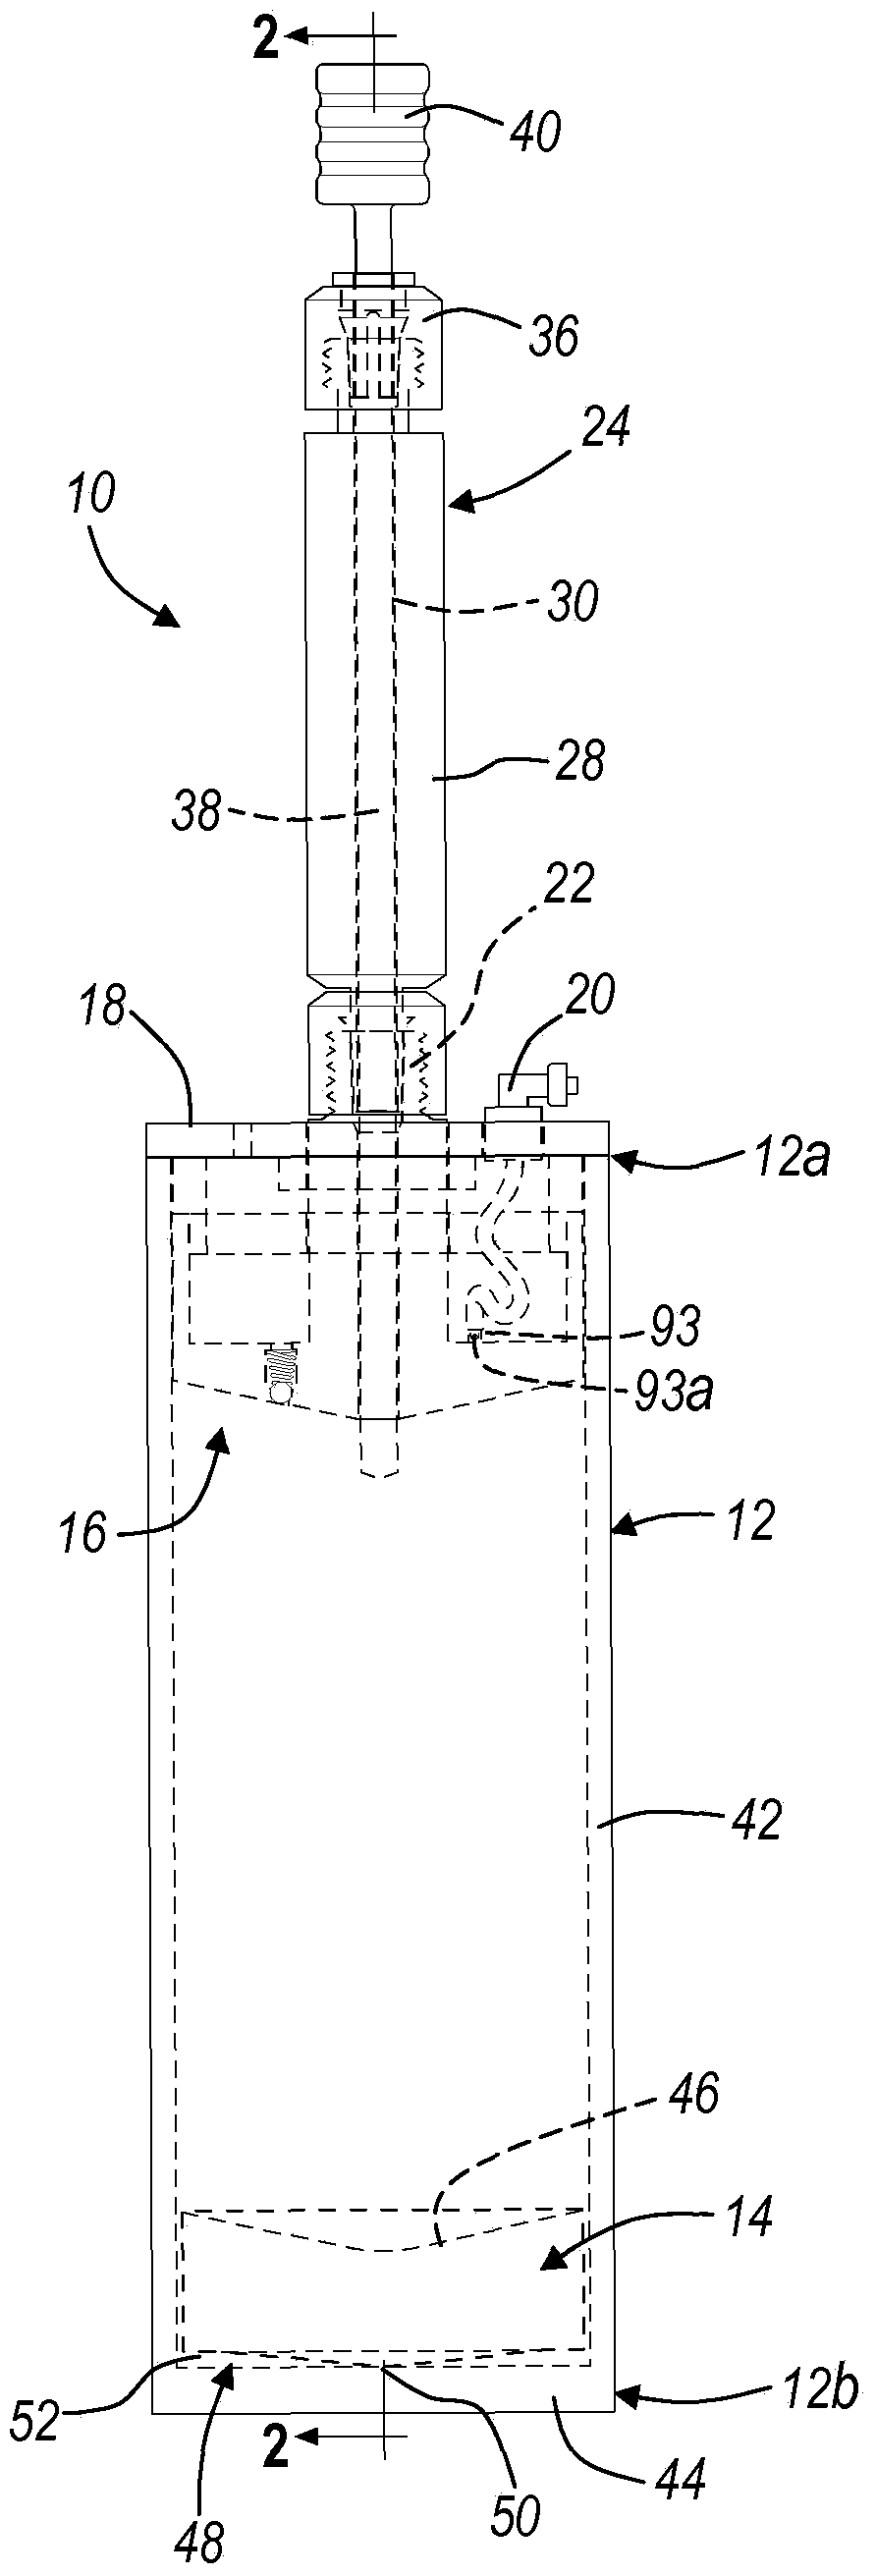 Apparatus and method for separating and concentrating fluids containing multiple components